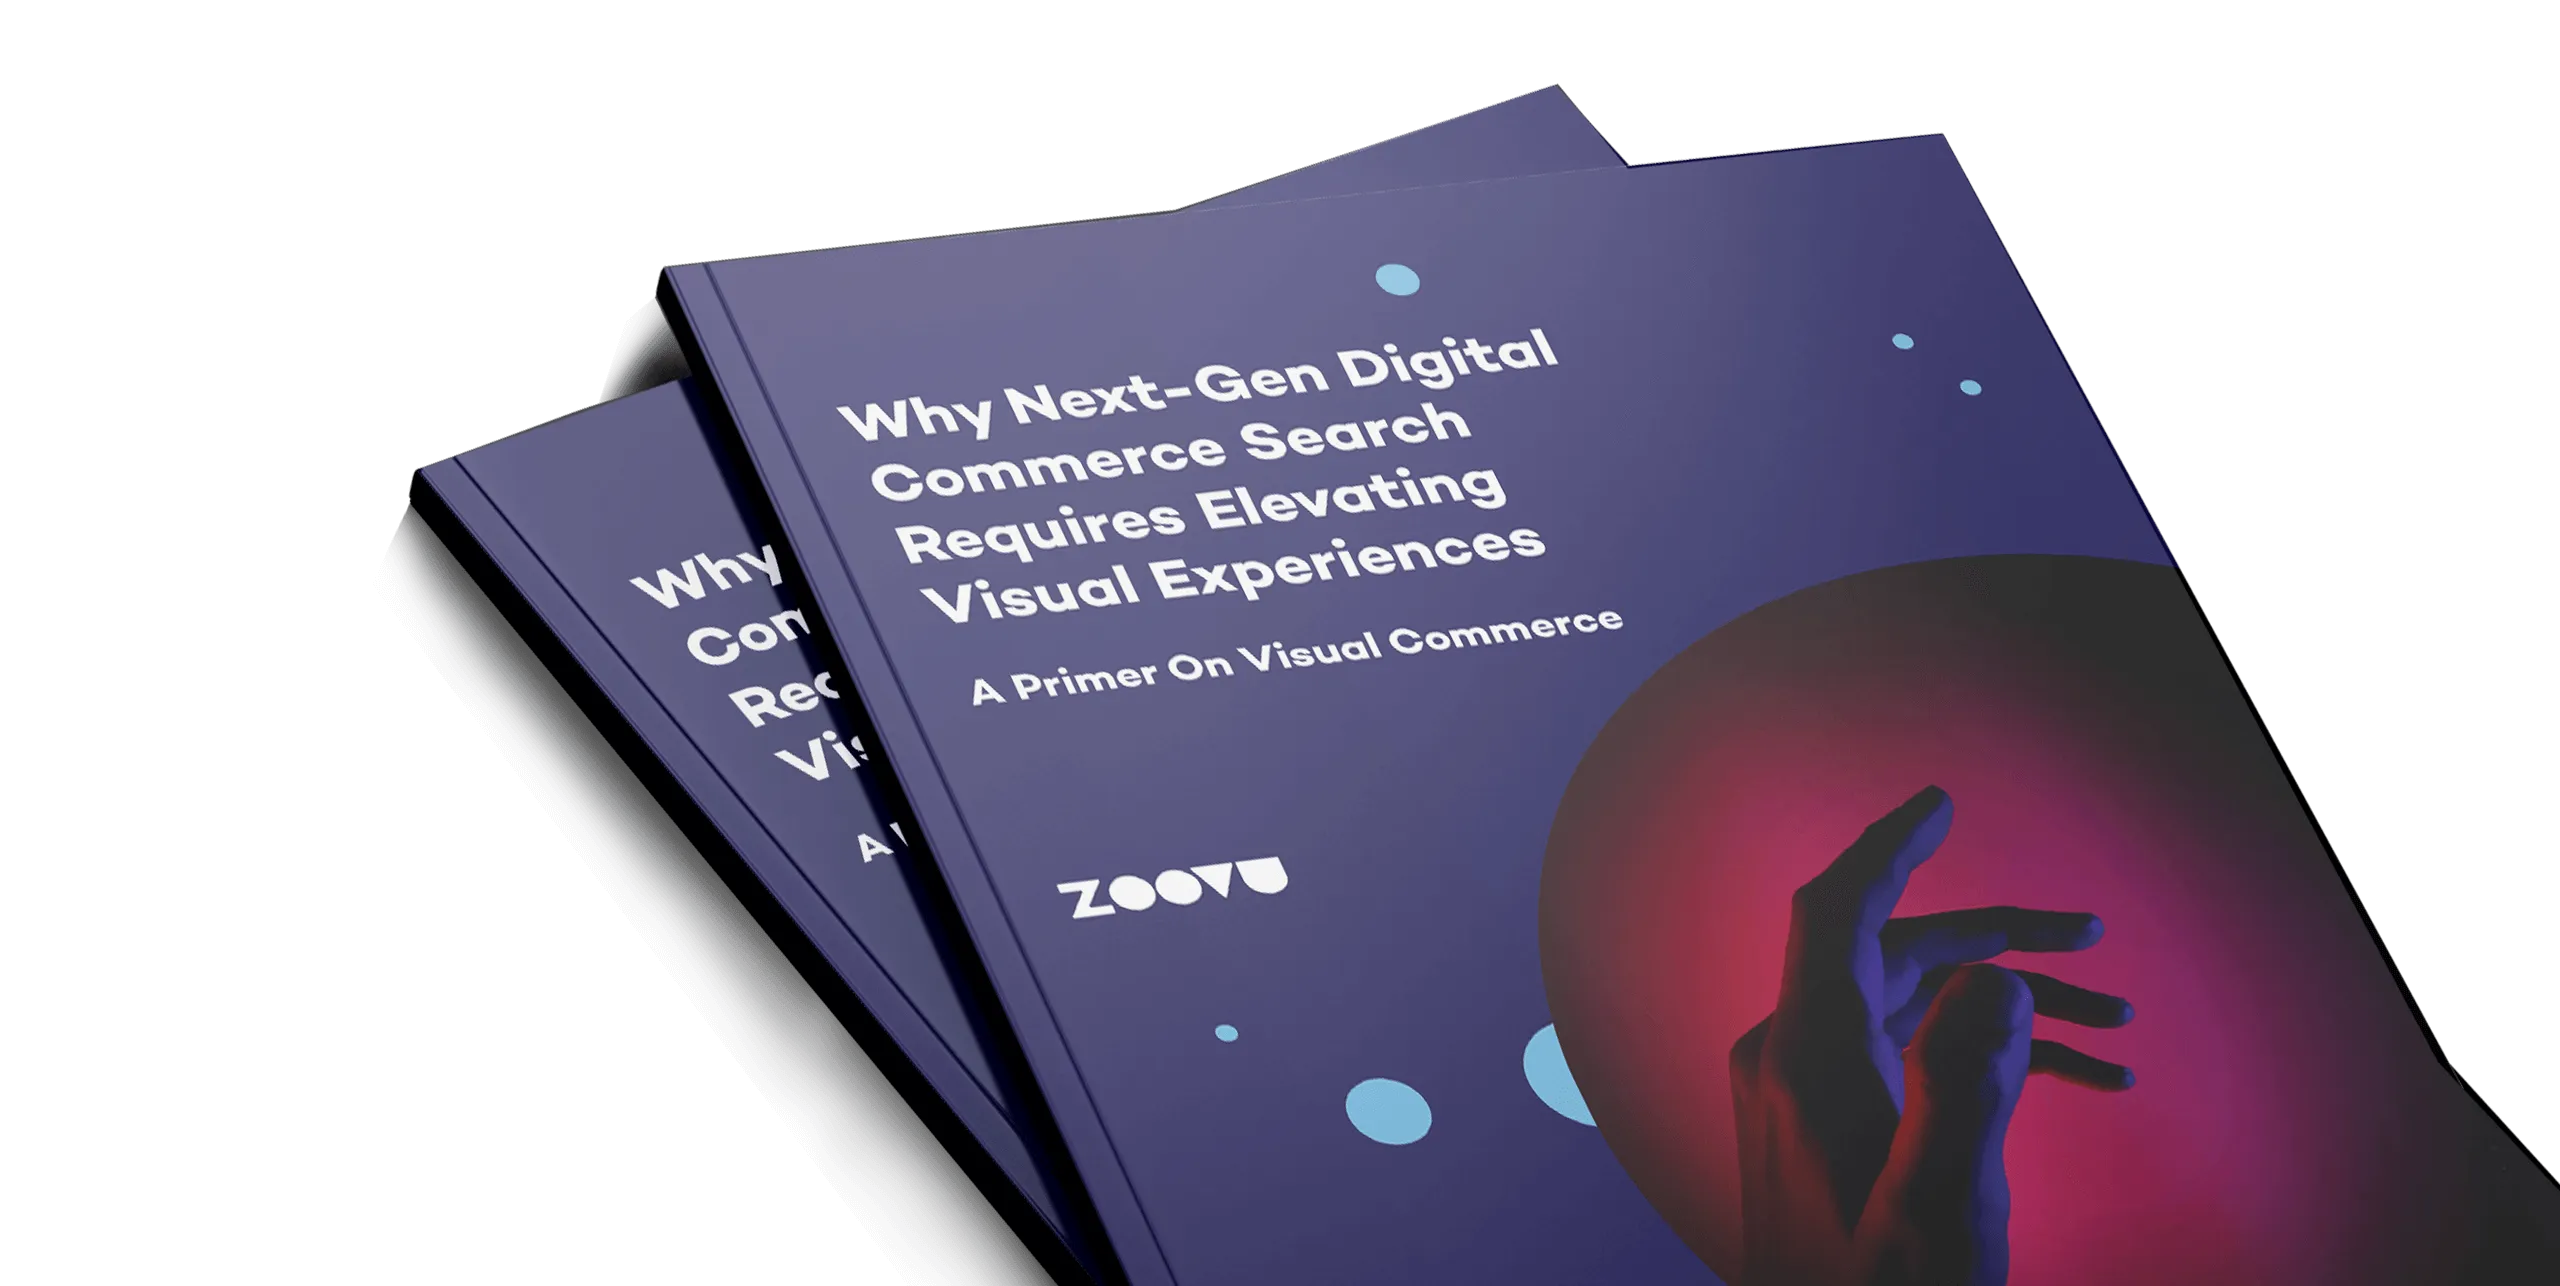 Why Next-Gen digital commerce search requires elevating visual experiences